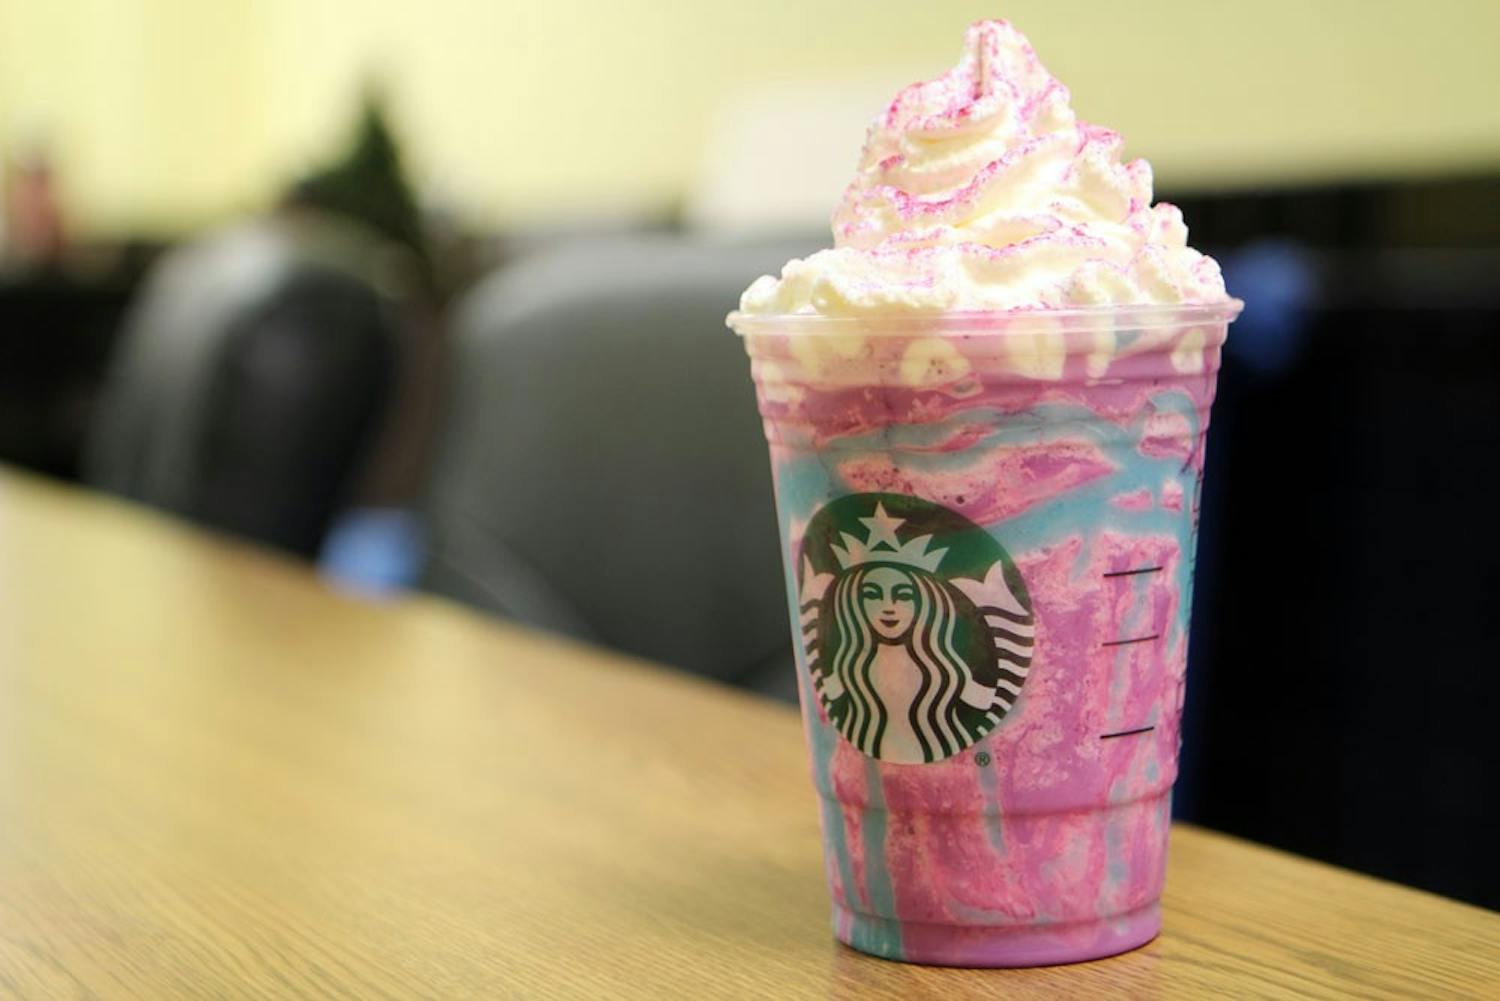 For a limited time Starbucks’ Unicorn Frappuccino is available at participating stores. The drink changes color and goes from sweet to sour as you drink it.